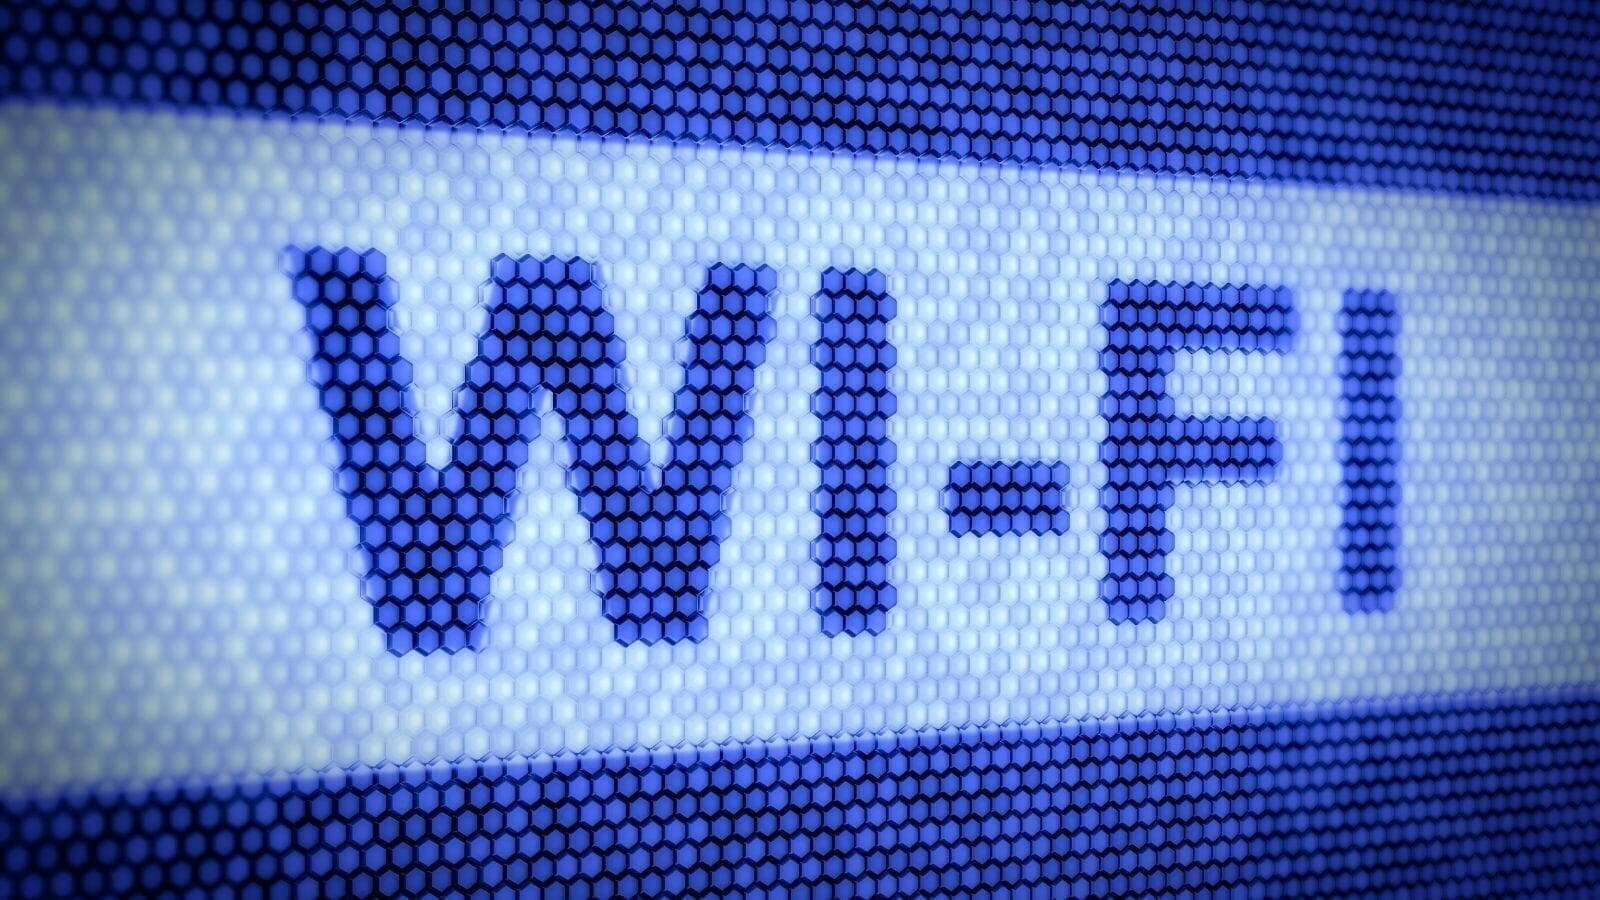  10 Strategies to Maximize Your Wi-Fi Speed Today